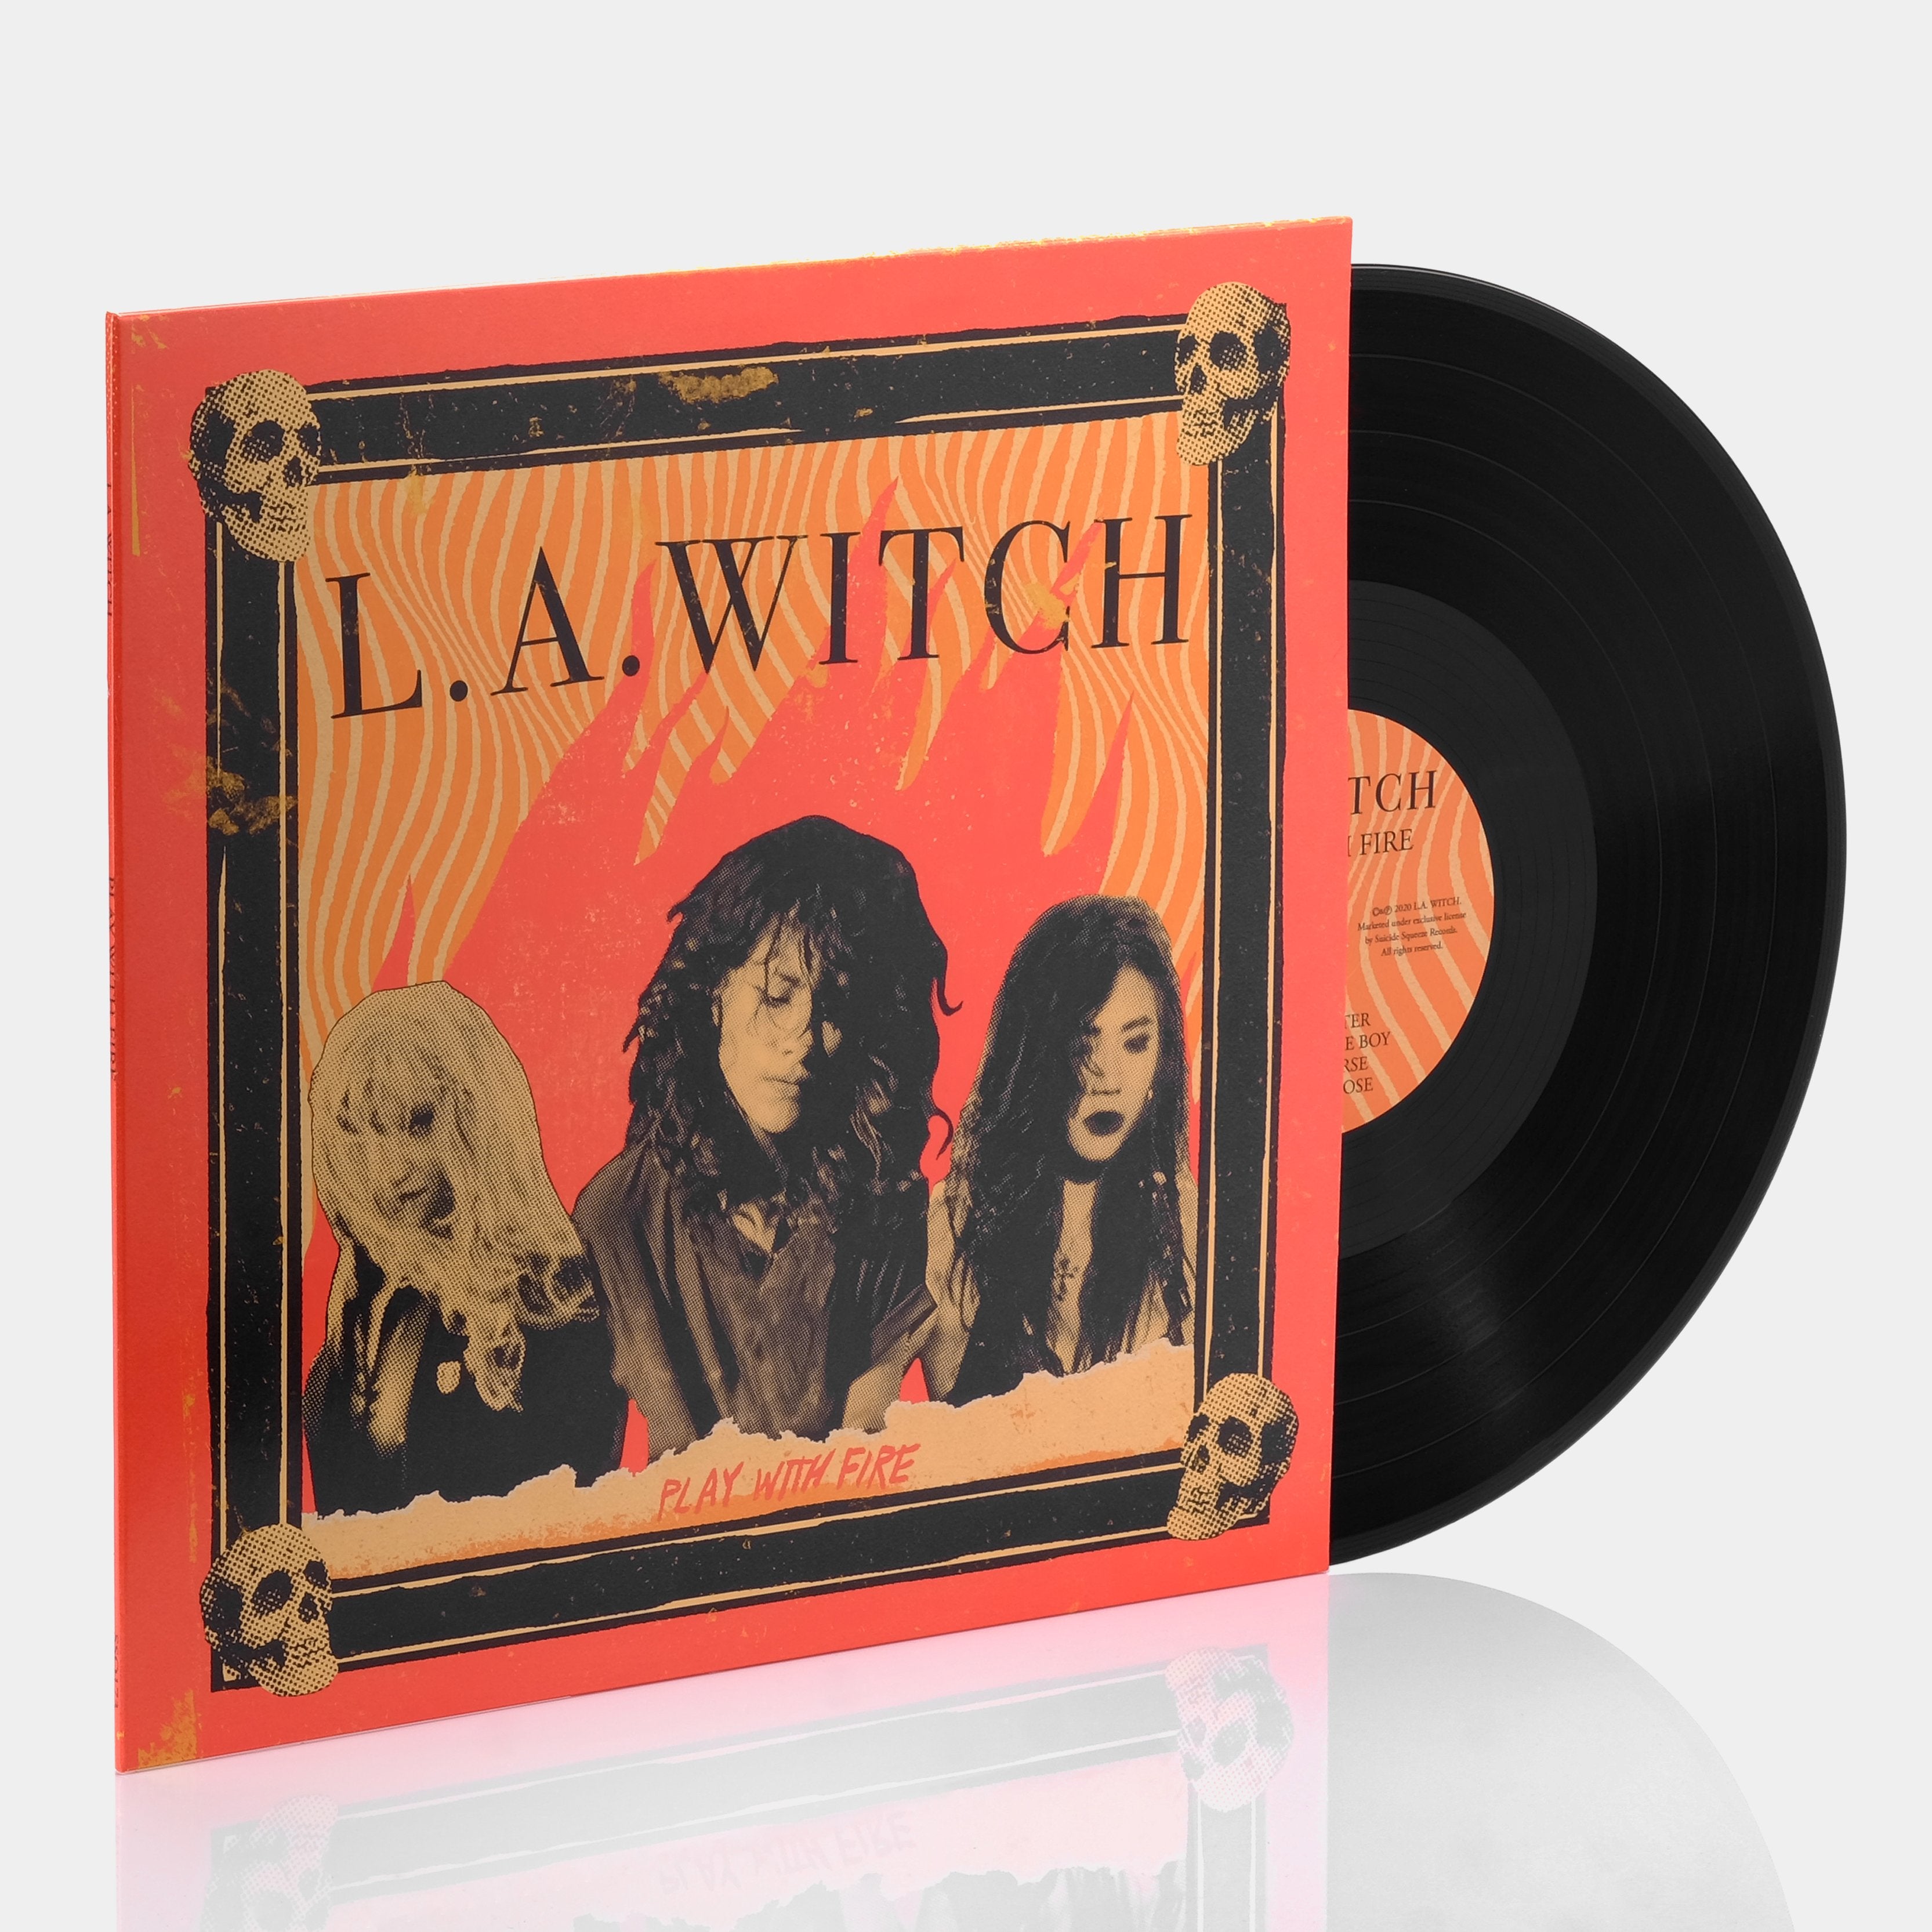 L.A. Witch - Play With Fire LP Vinyl Record